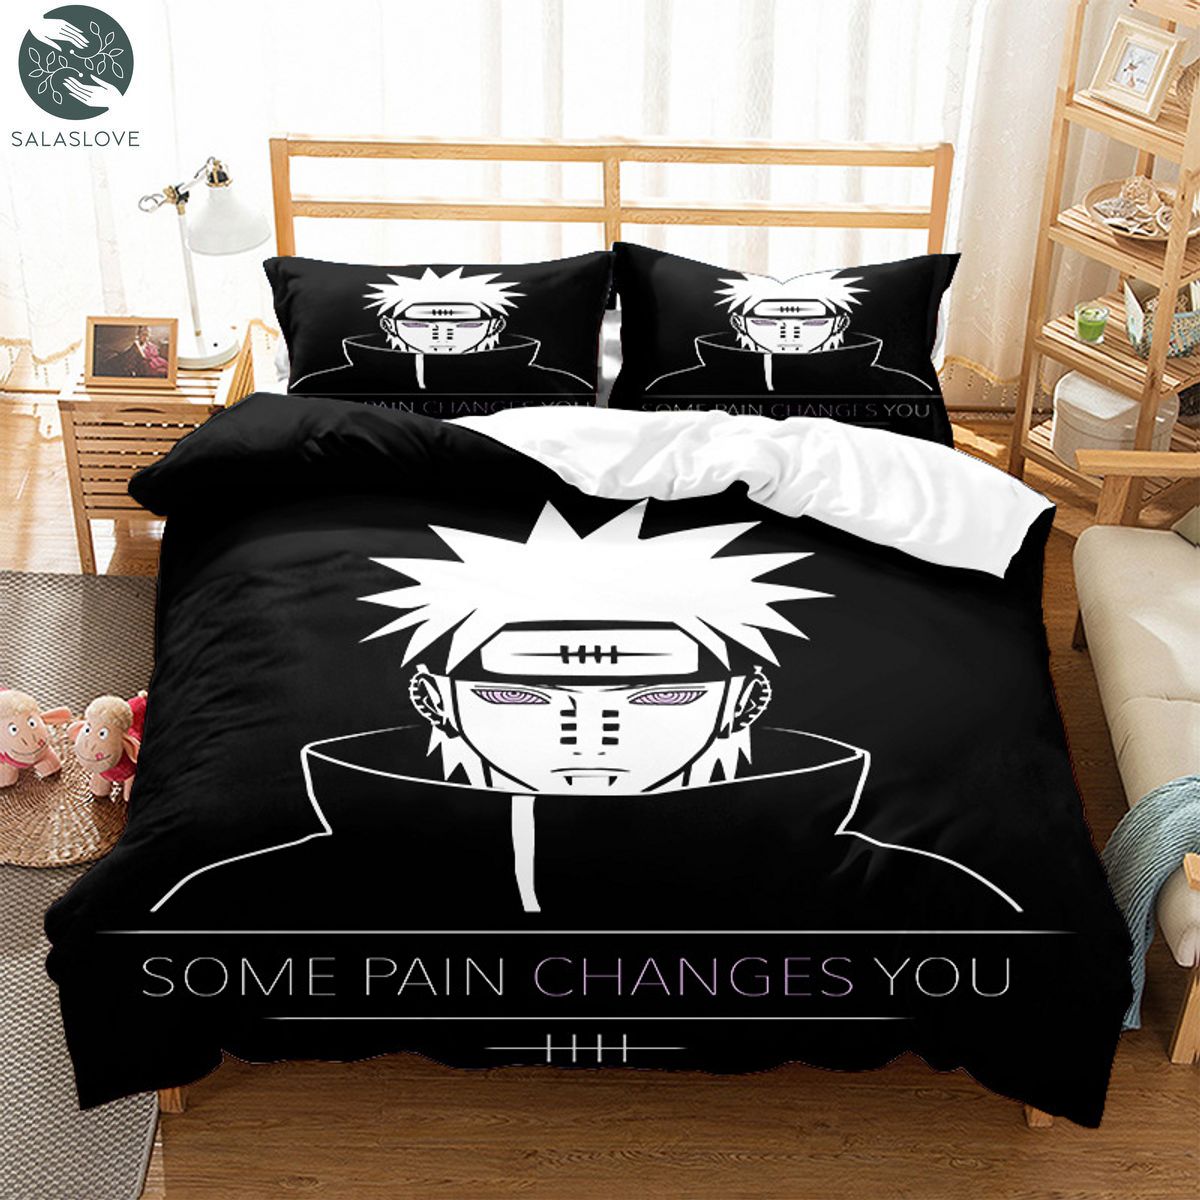 Naruto Bedding Set Duvet Cover Pillowcase Double Queen King Size Kids Bedroom TY8407